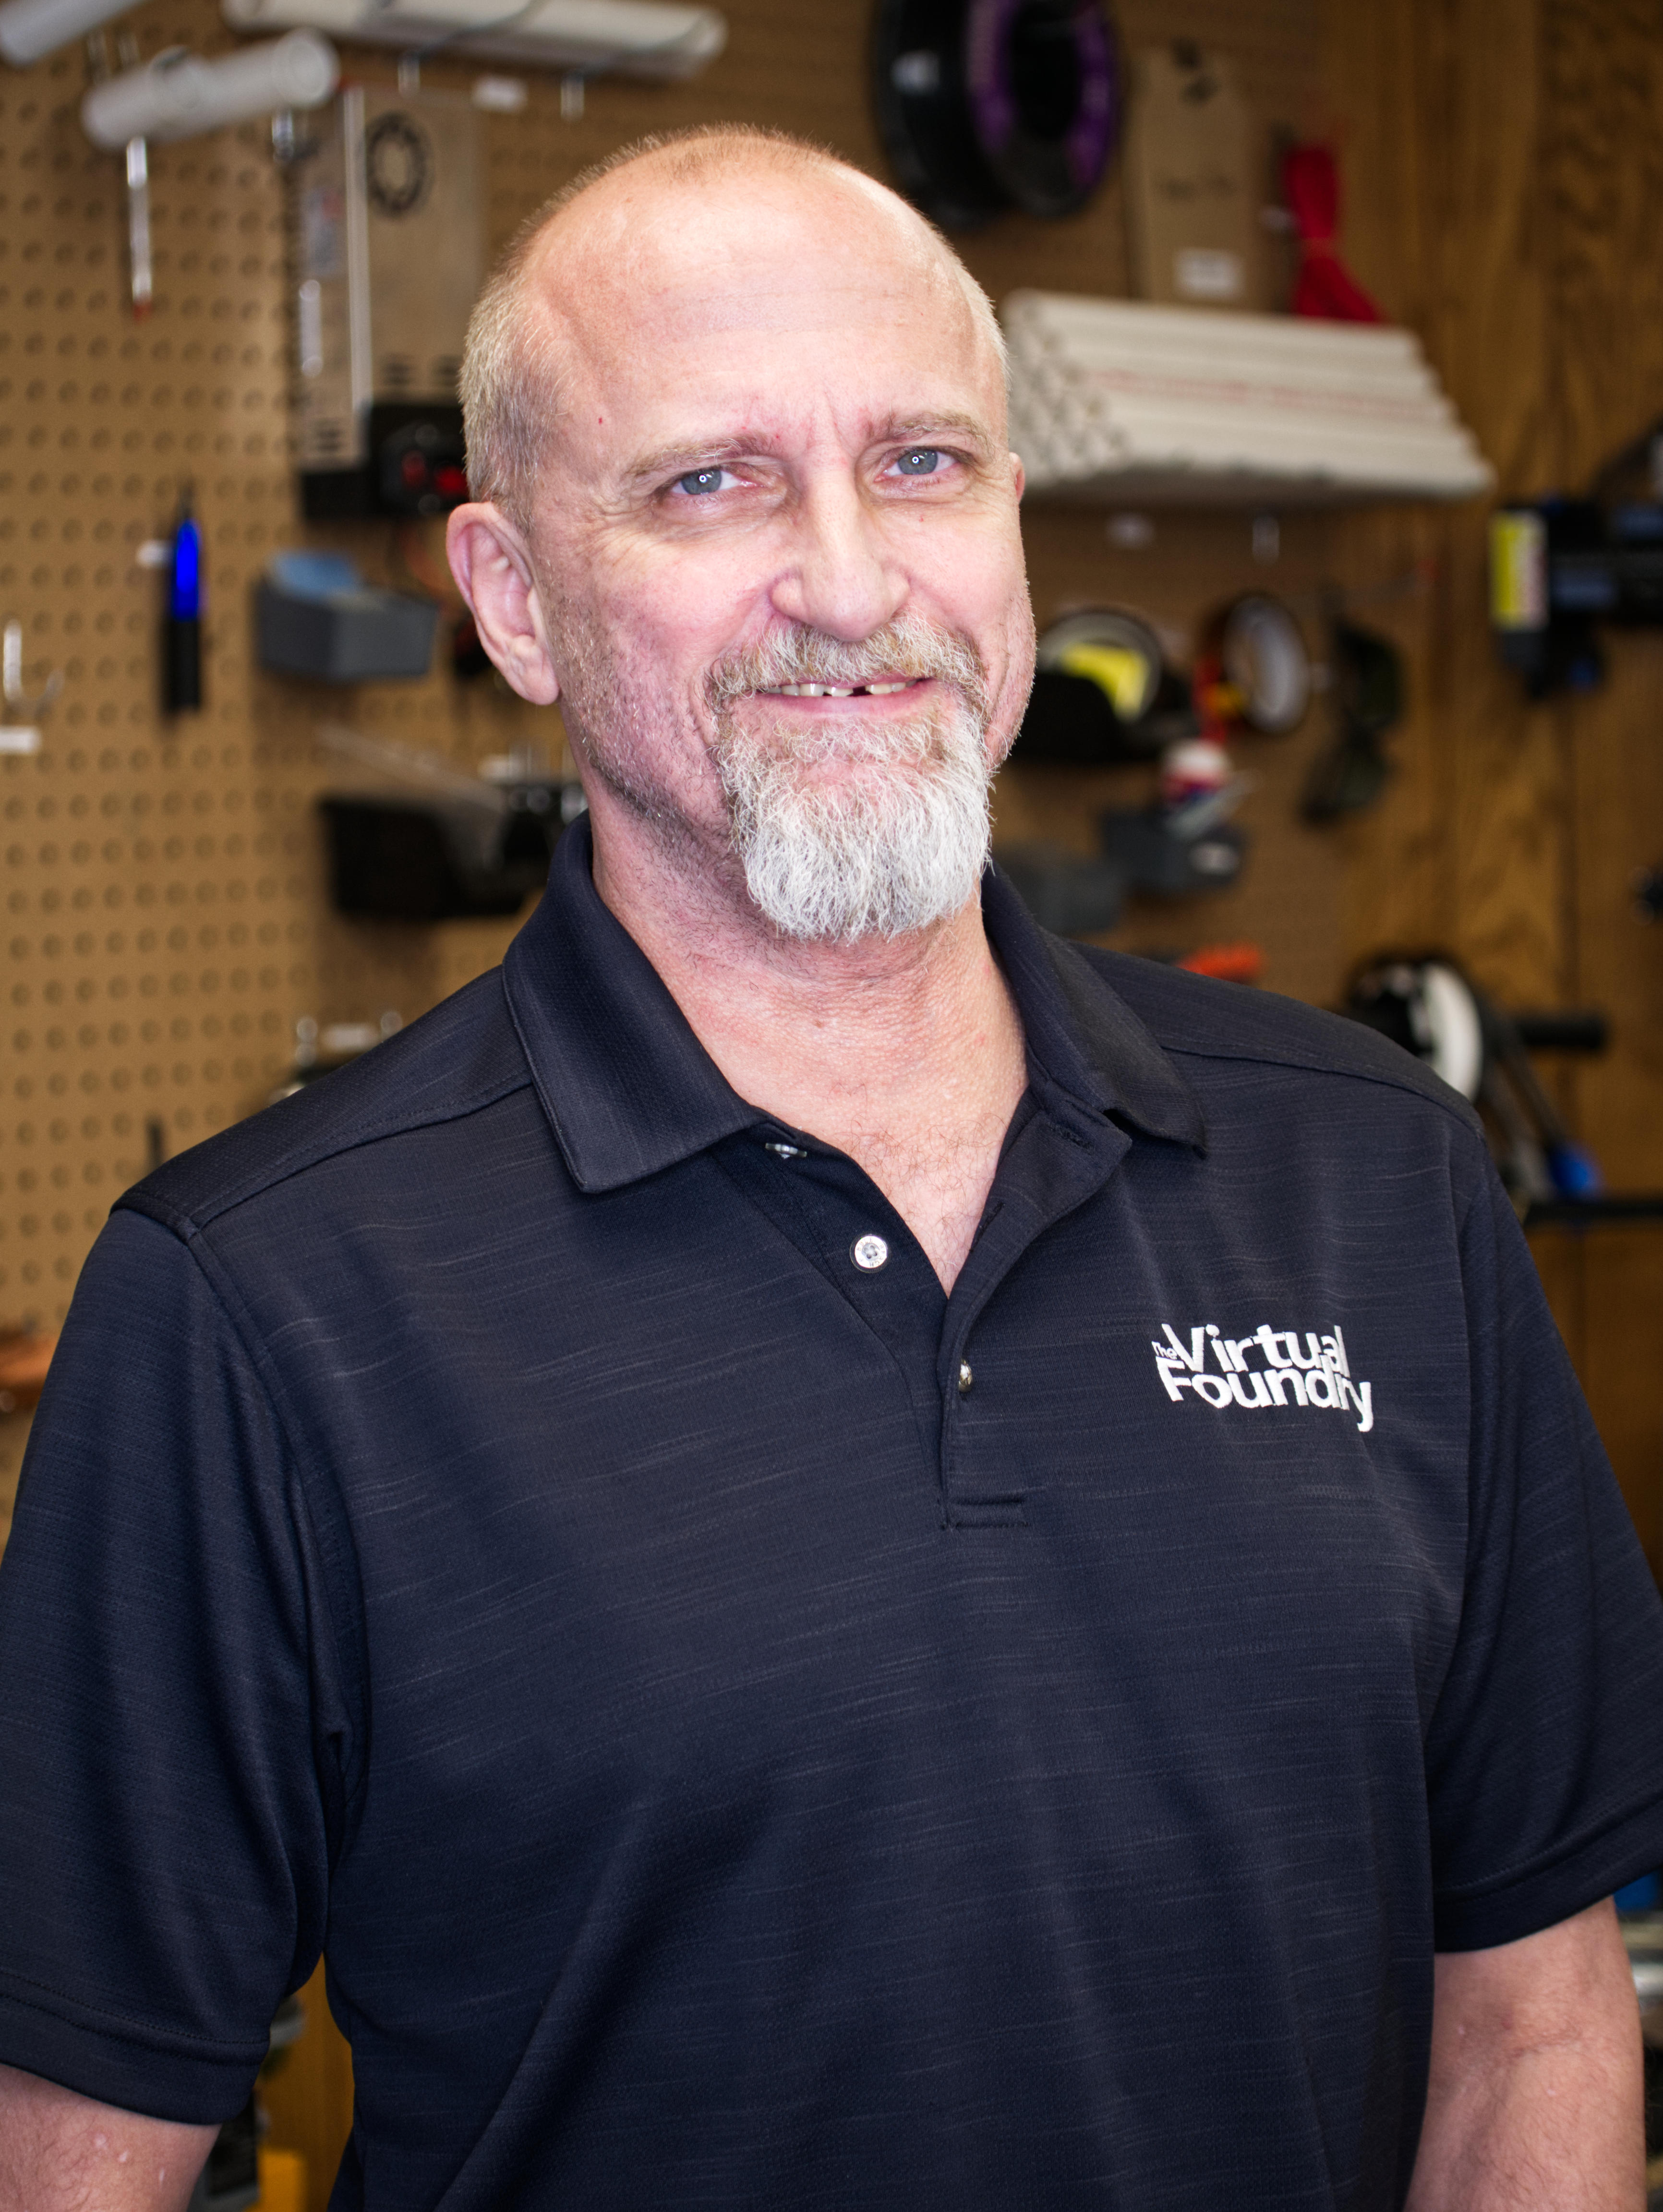 Metal Filament A middle-aged man with a beard smiling at the camera, wearing a black polo shirt with the logo "virtual foundry," standing in a manufacturing workshop.